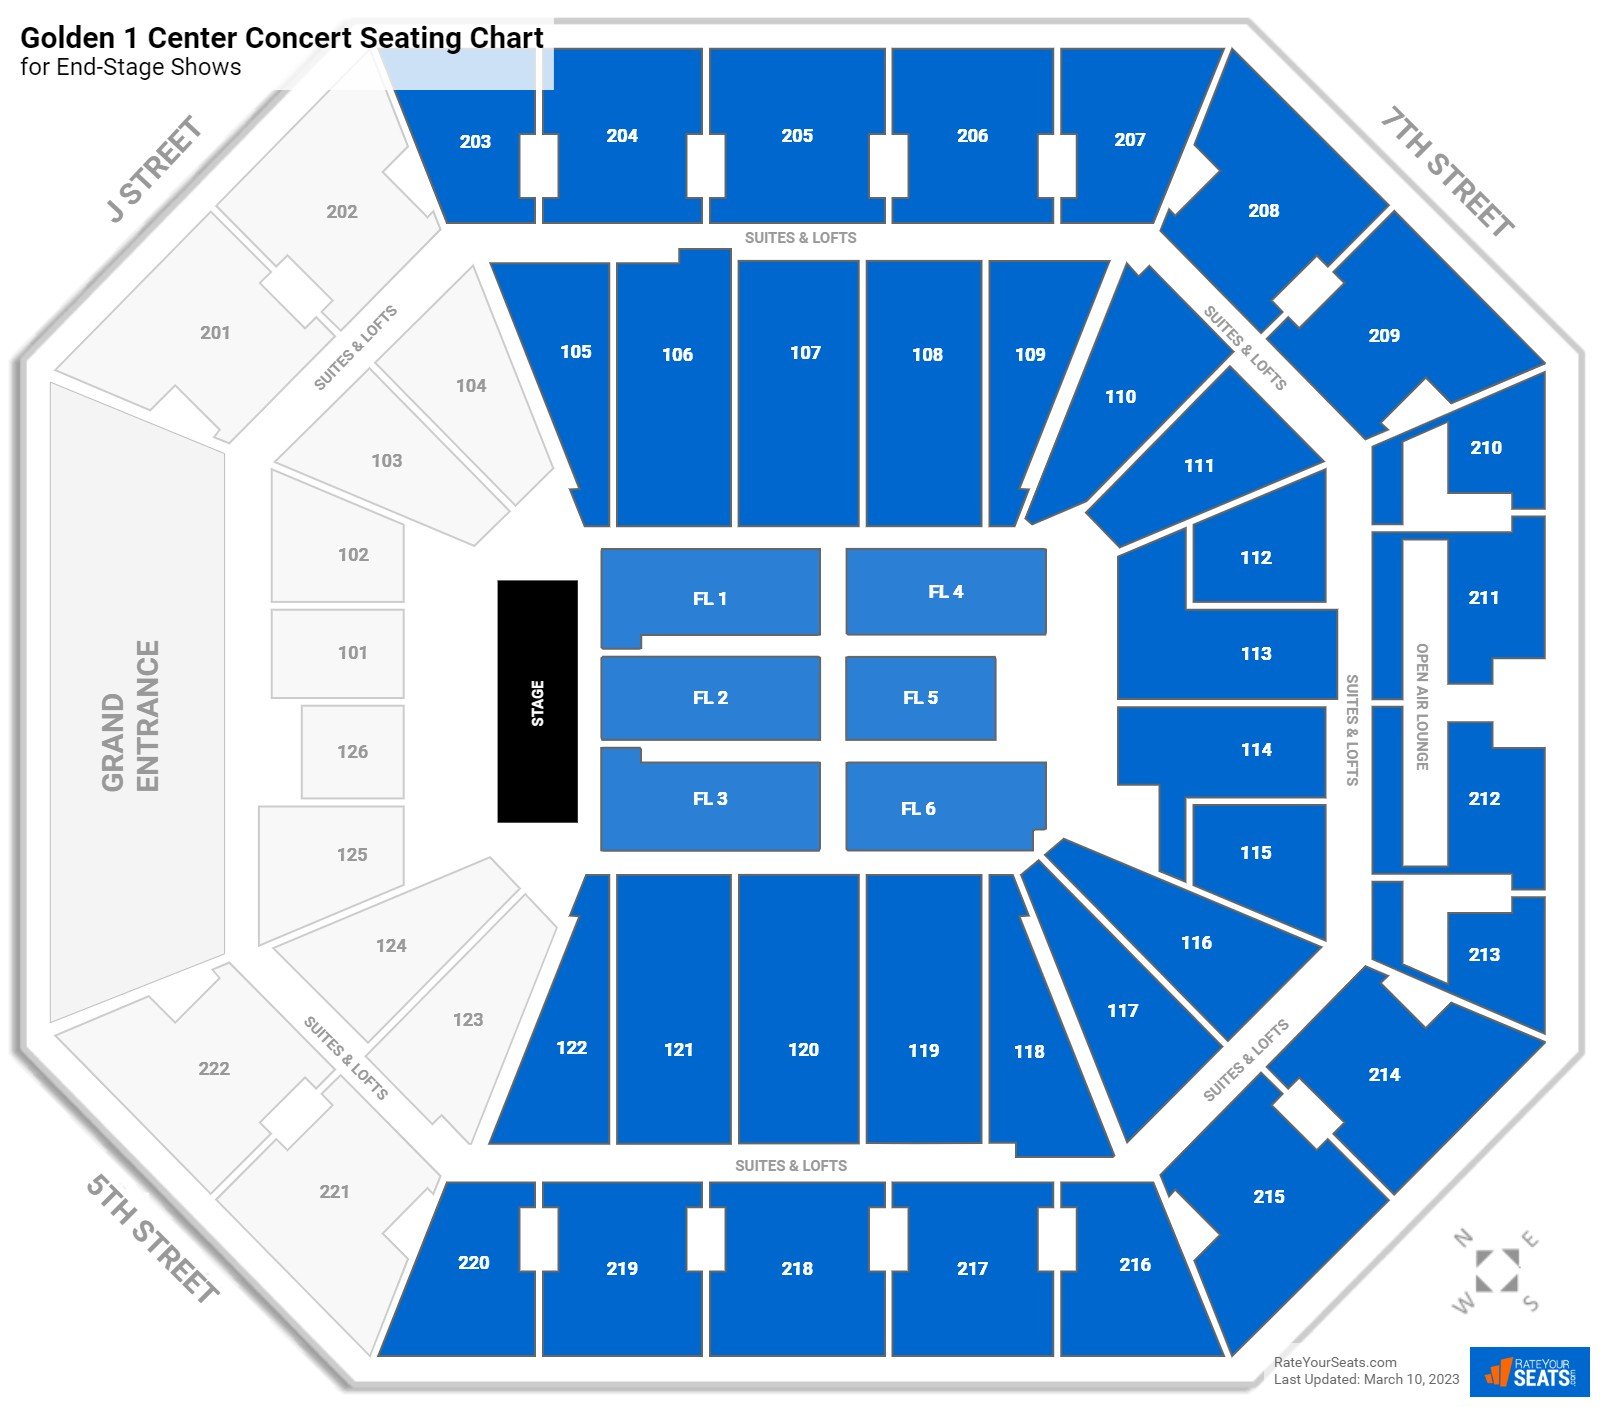 Golden 1 Center Seating Charts 